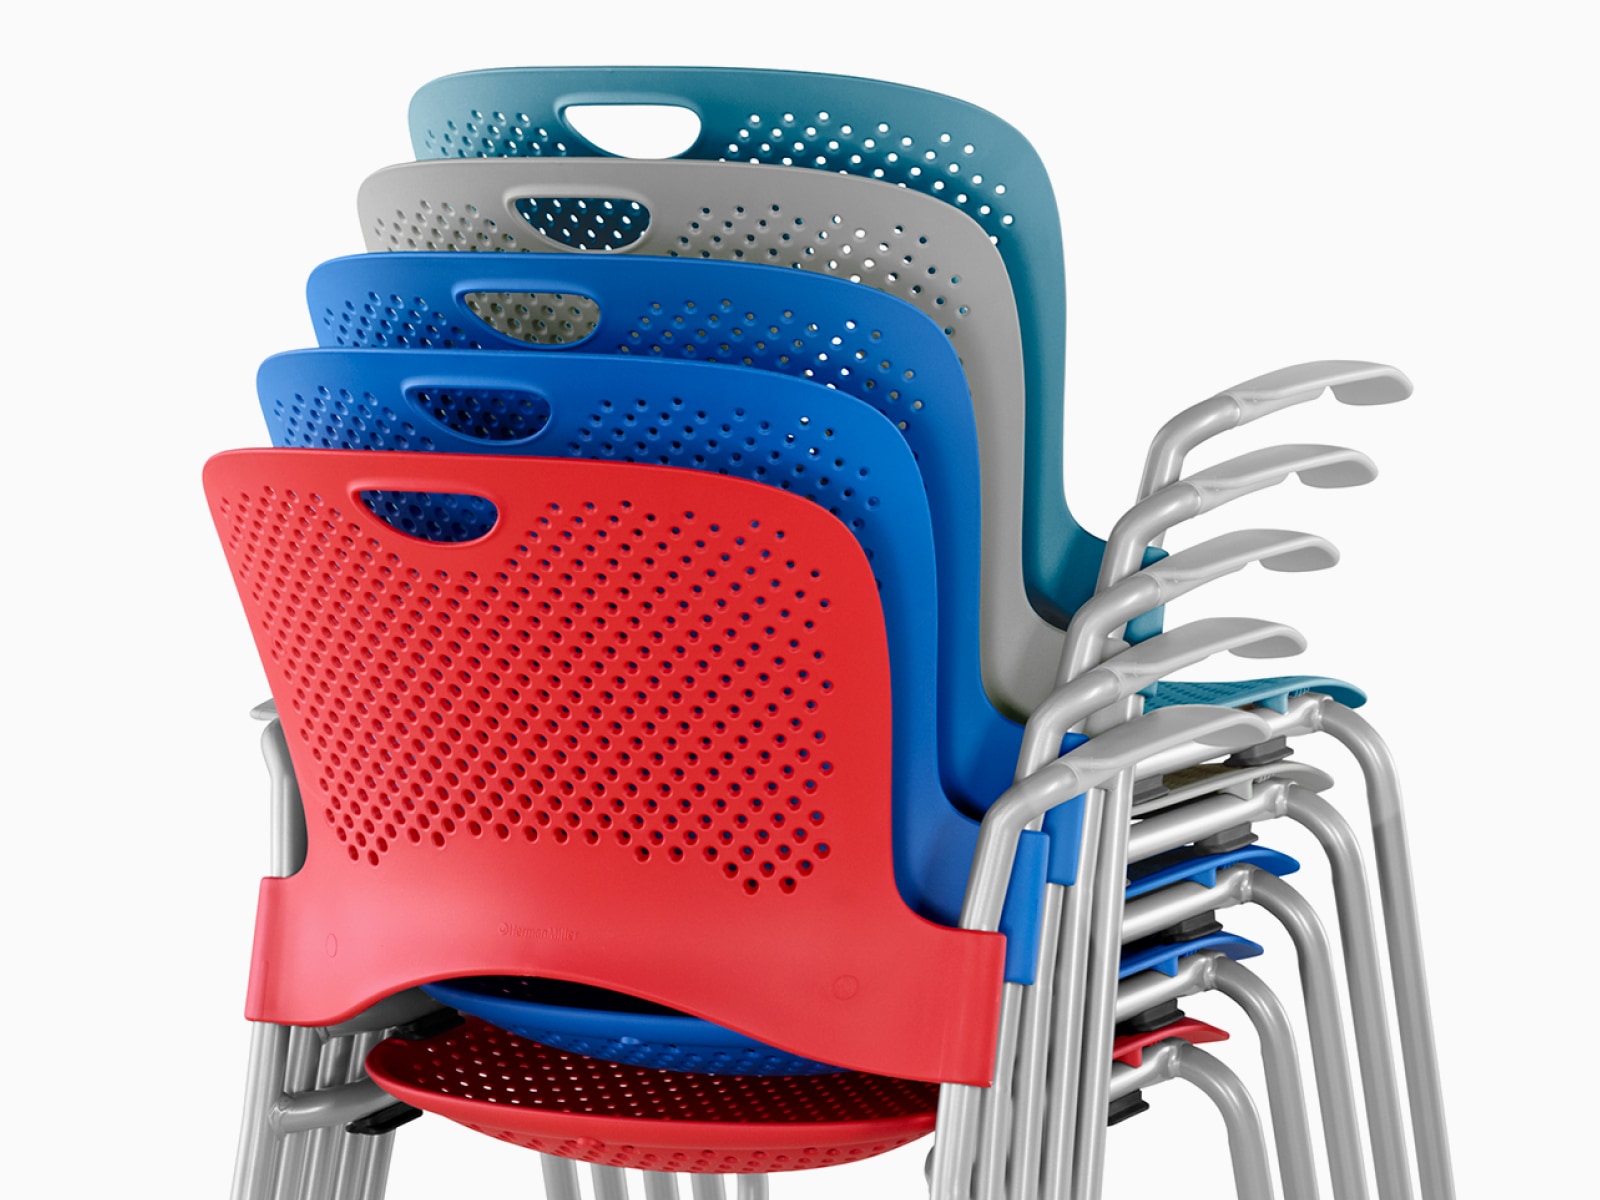 Rear view of red, blue, gray, and turquoise Caper chairs, stacked five-high.